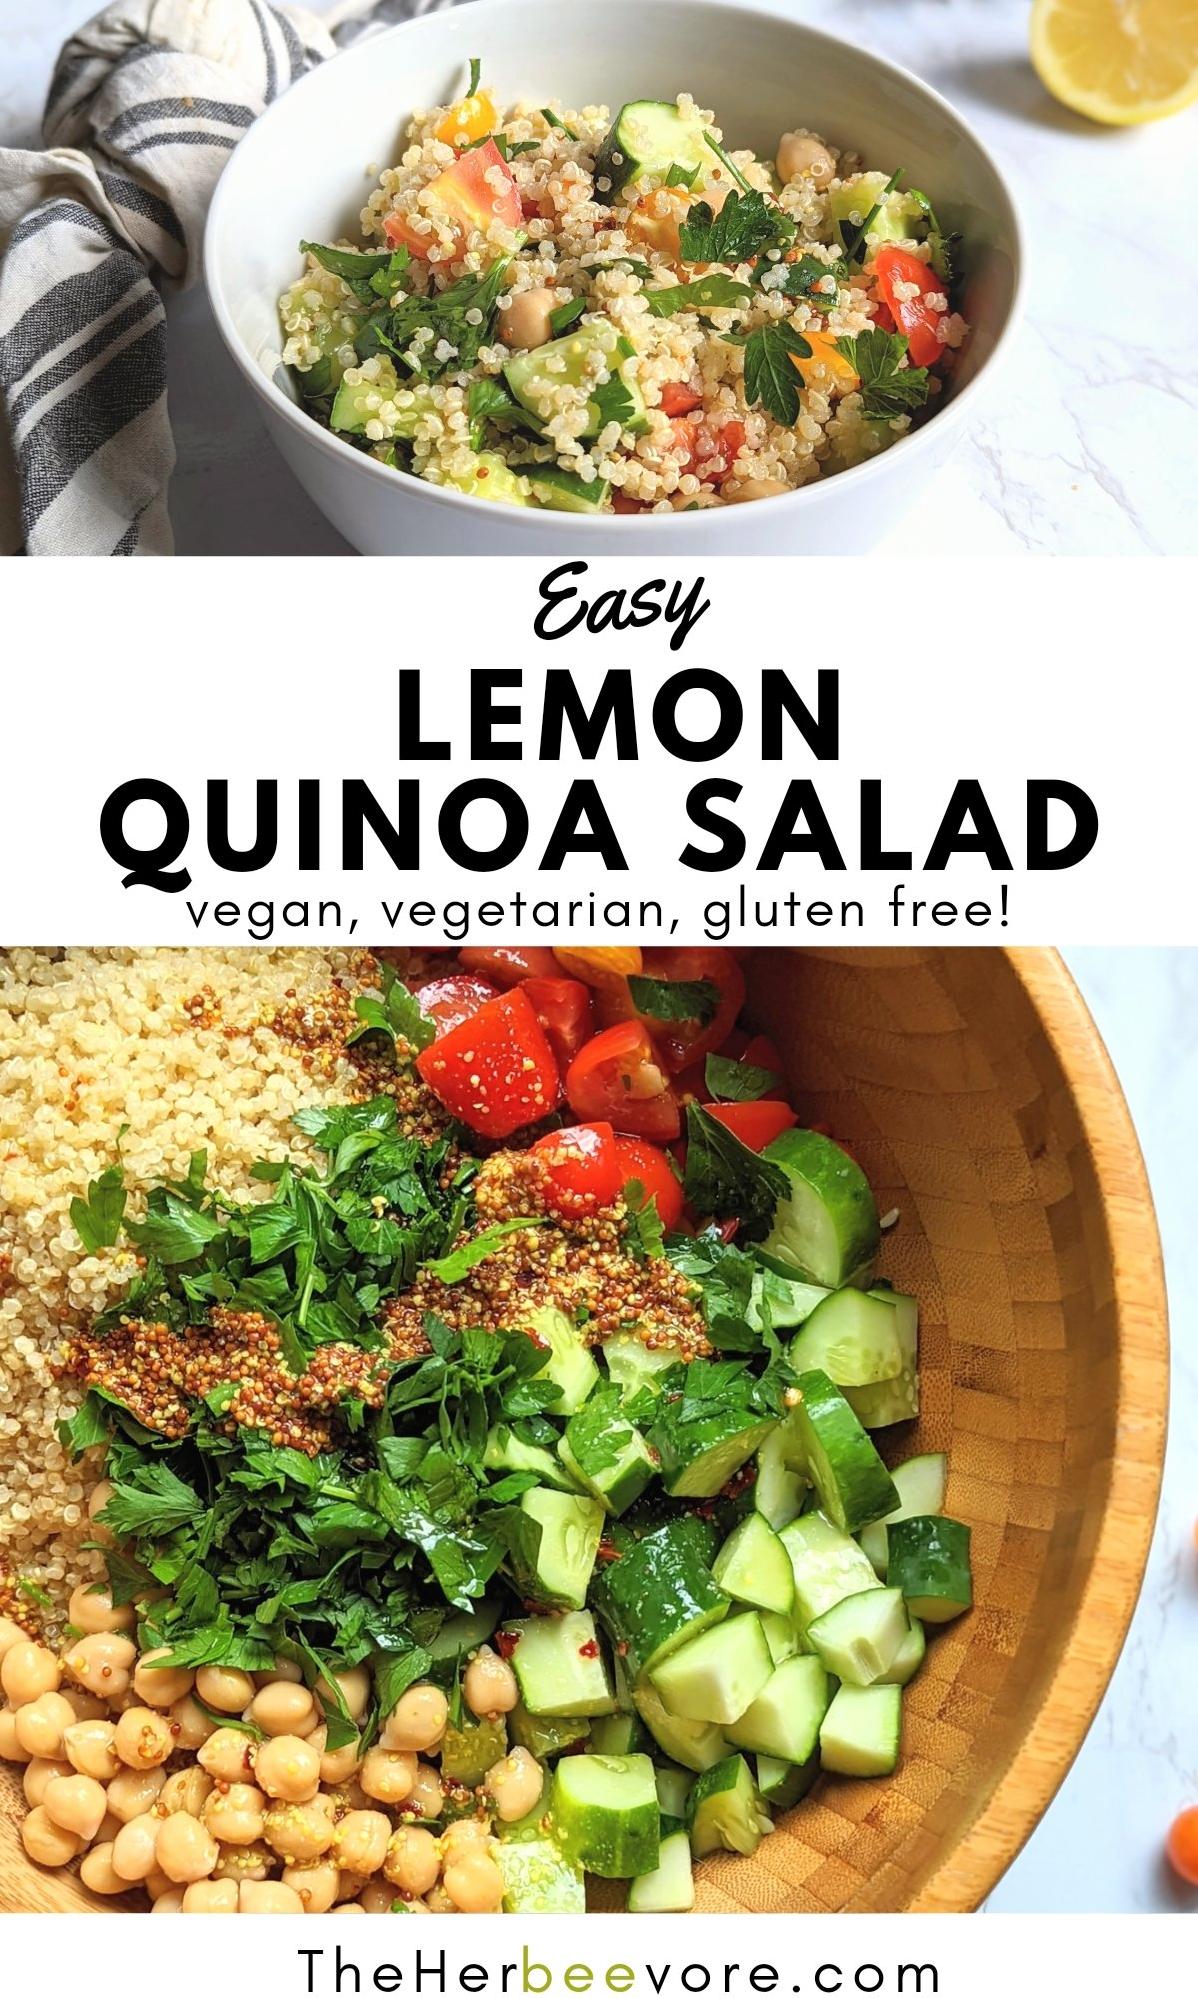  Who says gluten-free can't be delicious? This quinoa salad begs to differ ????